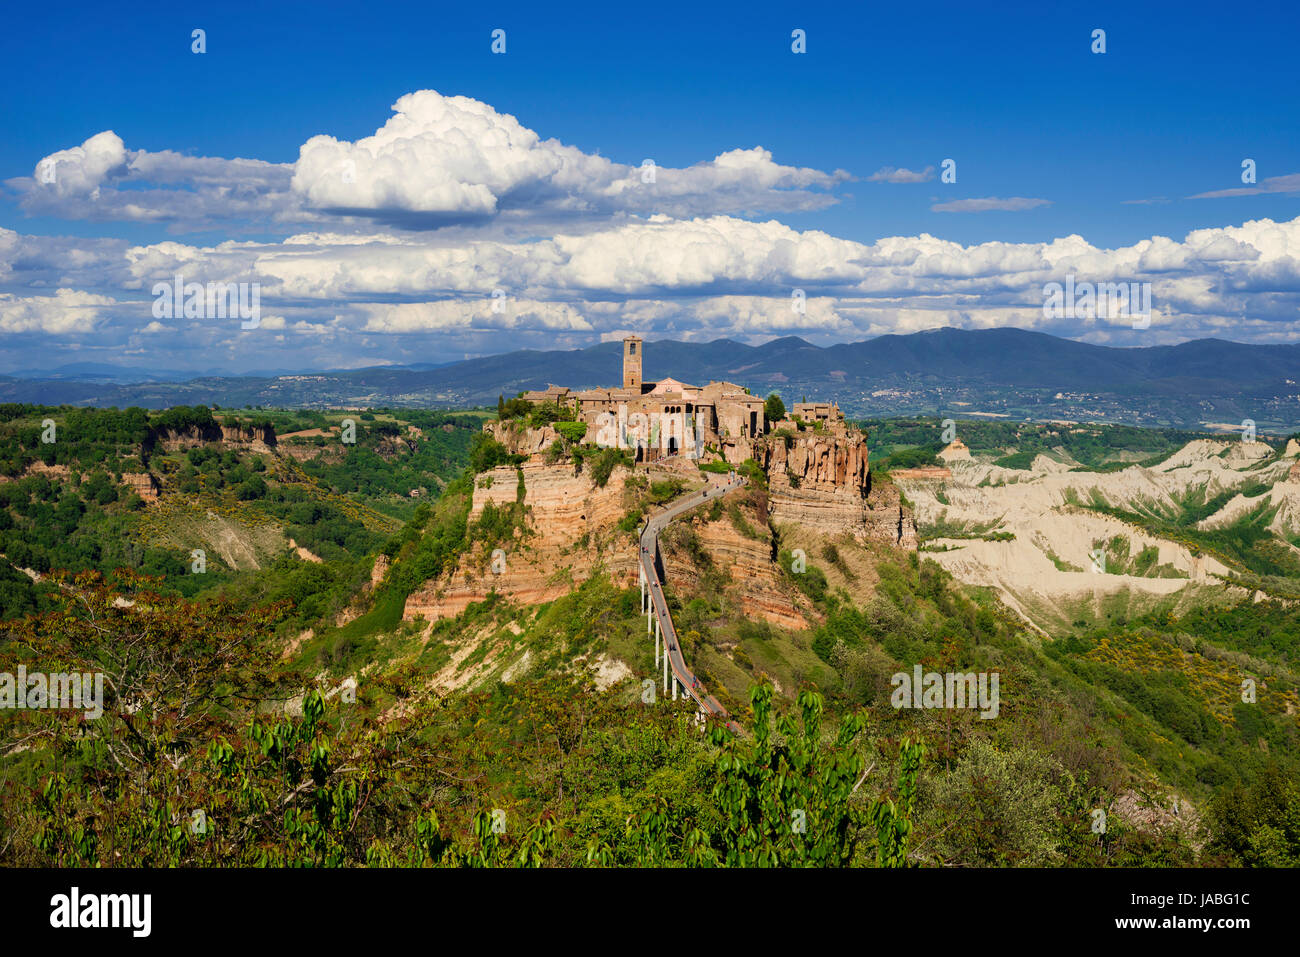 Civita di Bagnoregio 'the town that is dying' medieval historic center near Rome Stock Photo